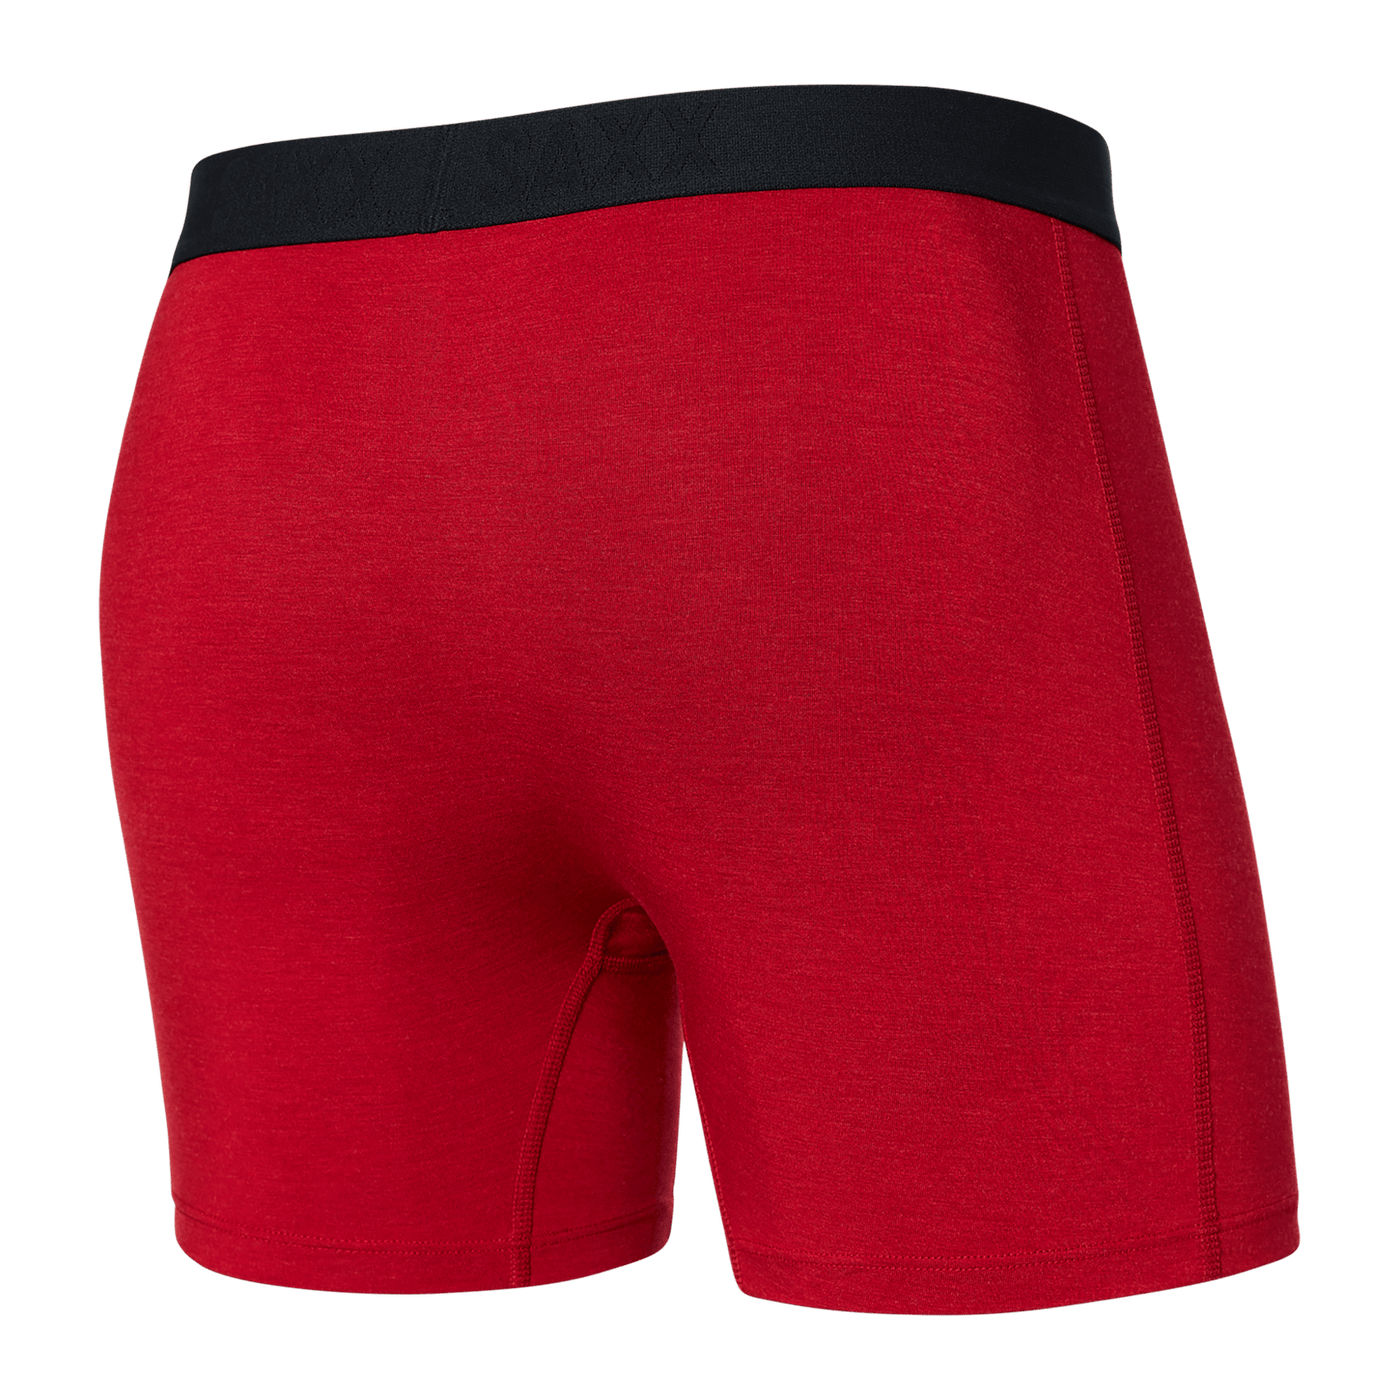 Saxx Vibe Boxers - Cherry Heather - The Hockey Shop Source For Sports